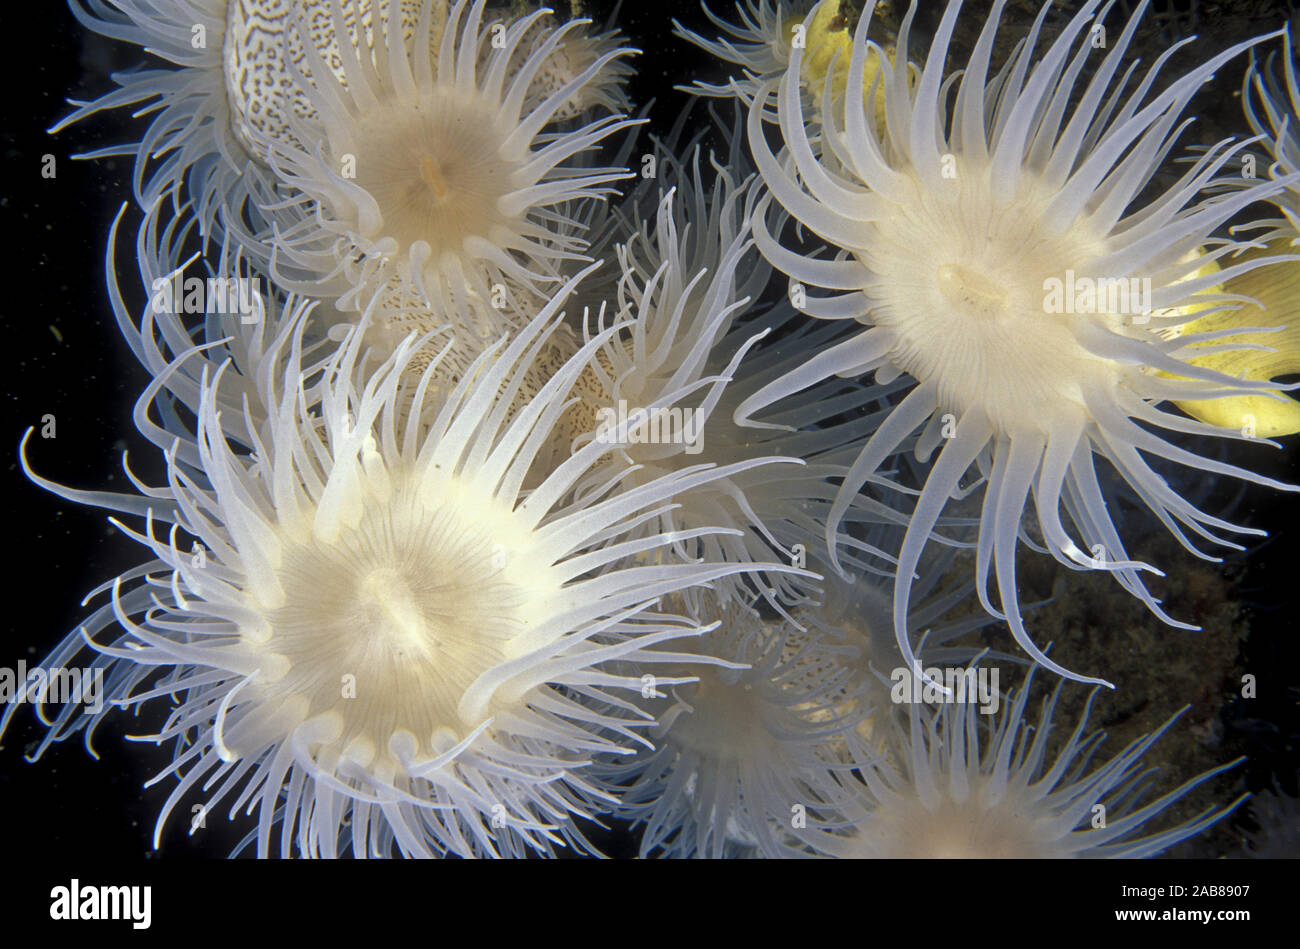 Striped and yellow wandering anemones (Nemanthus sp.), found in deeper water of NSW and Southern Queensland attached to sea whips, black coral and hyd Stock Photo